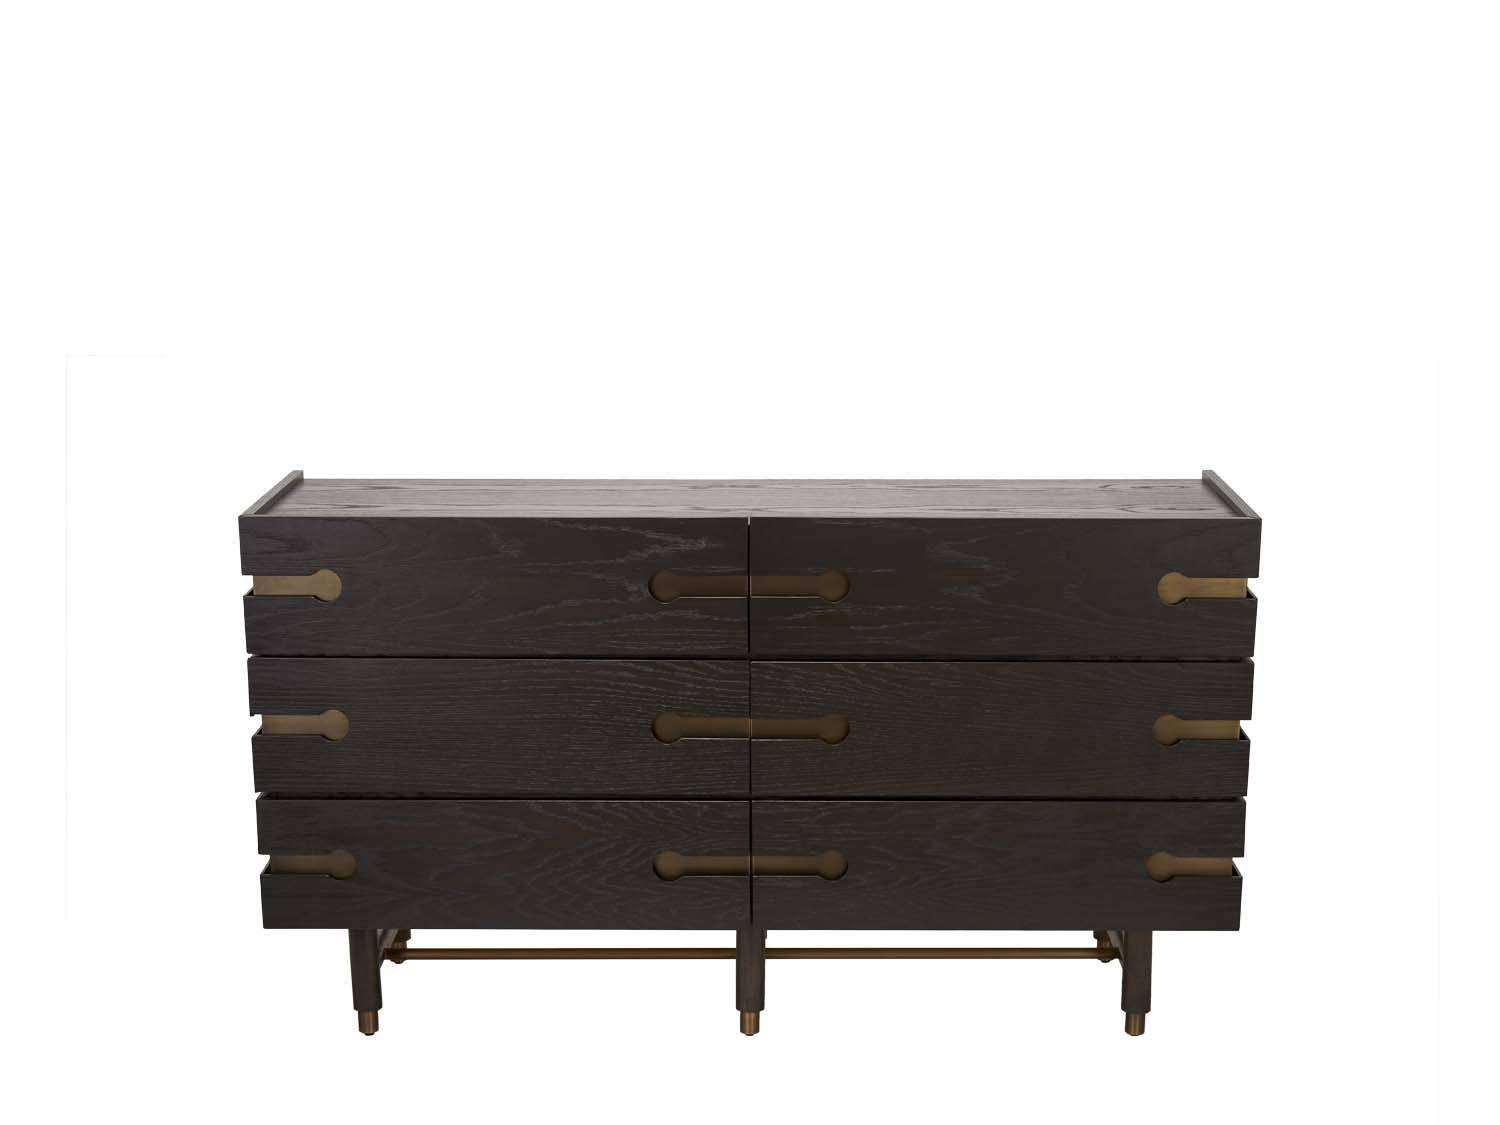 The 6-drawer Niguel dresser features 6 drawers, brass cap feet, and brass inlaid details.

The Lawson-Fenning Collection is designed and handmade in Los Angeles, California.
Message us to find out which finishes are currently in stock. Measure: